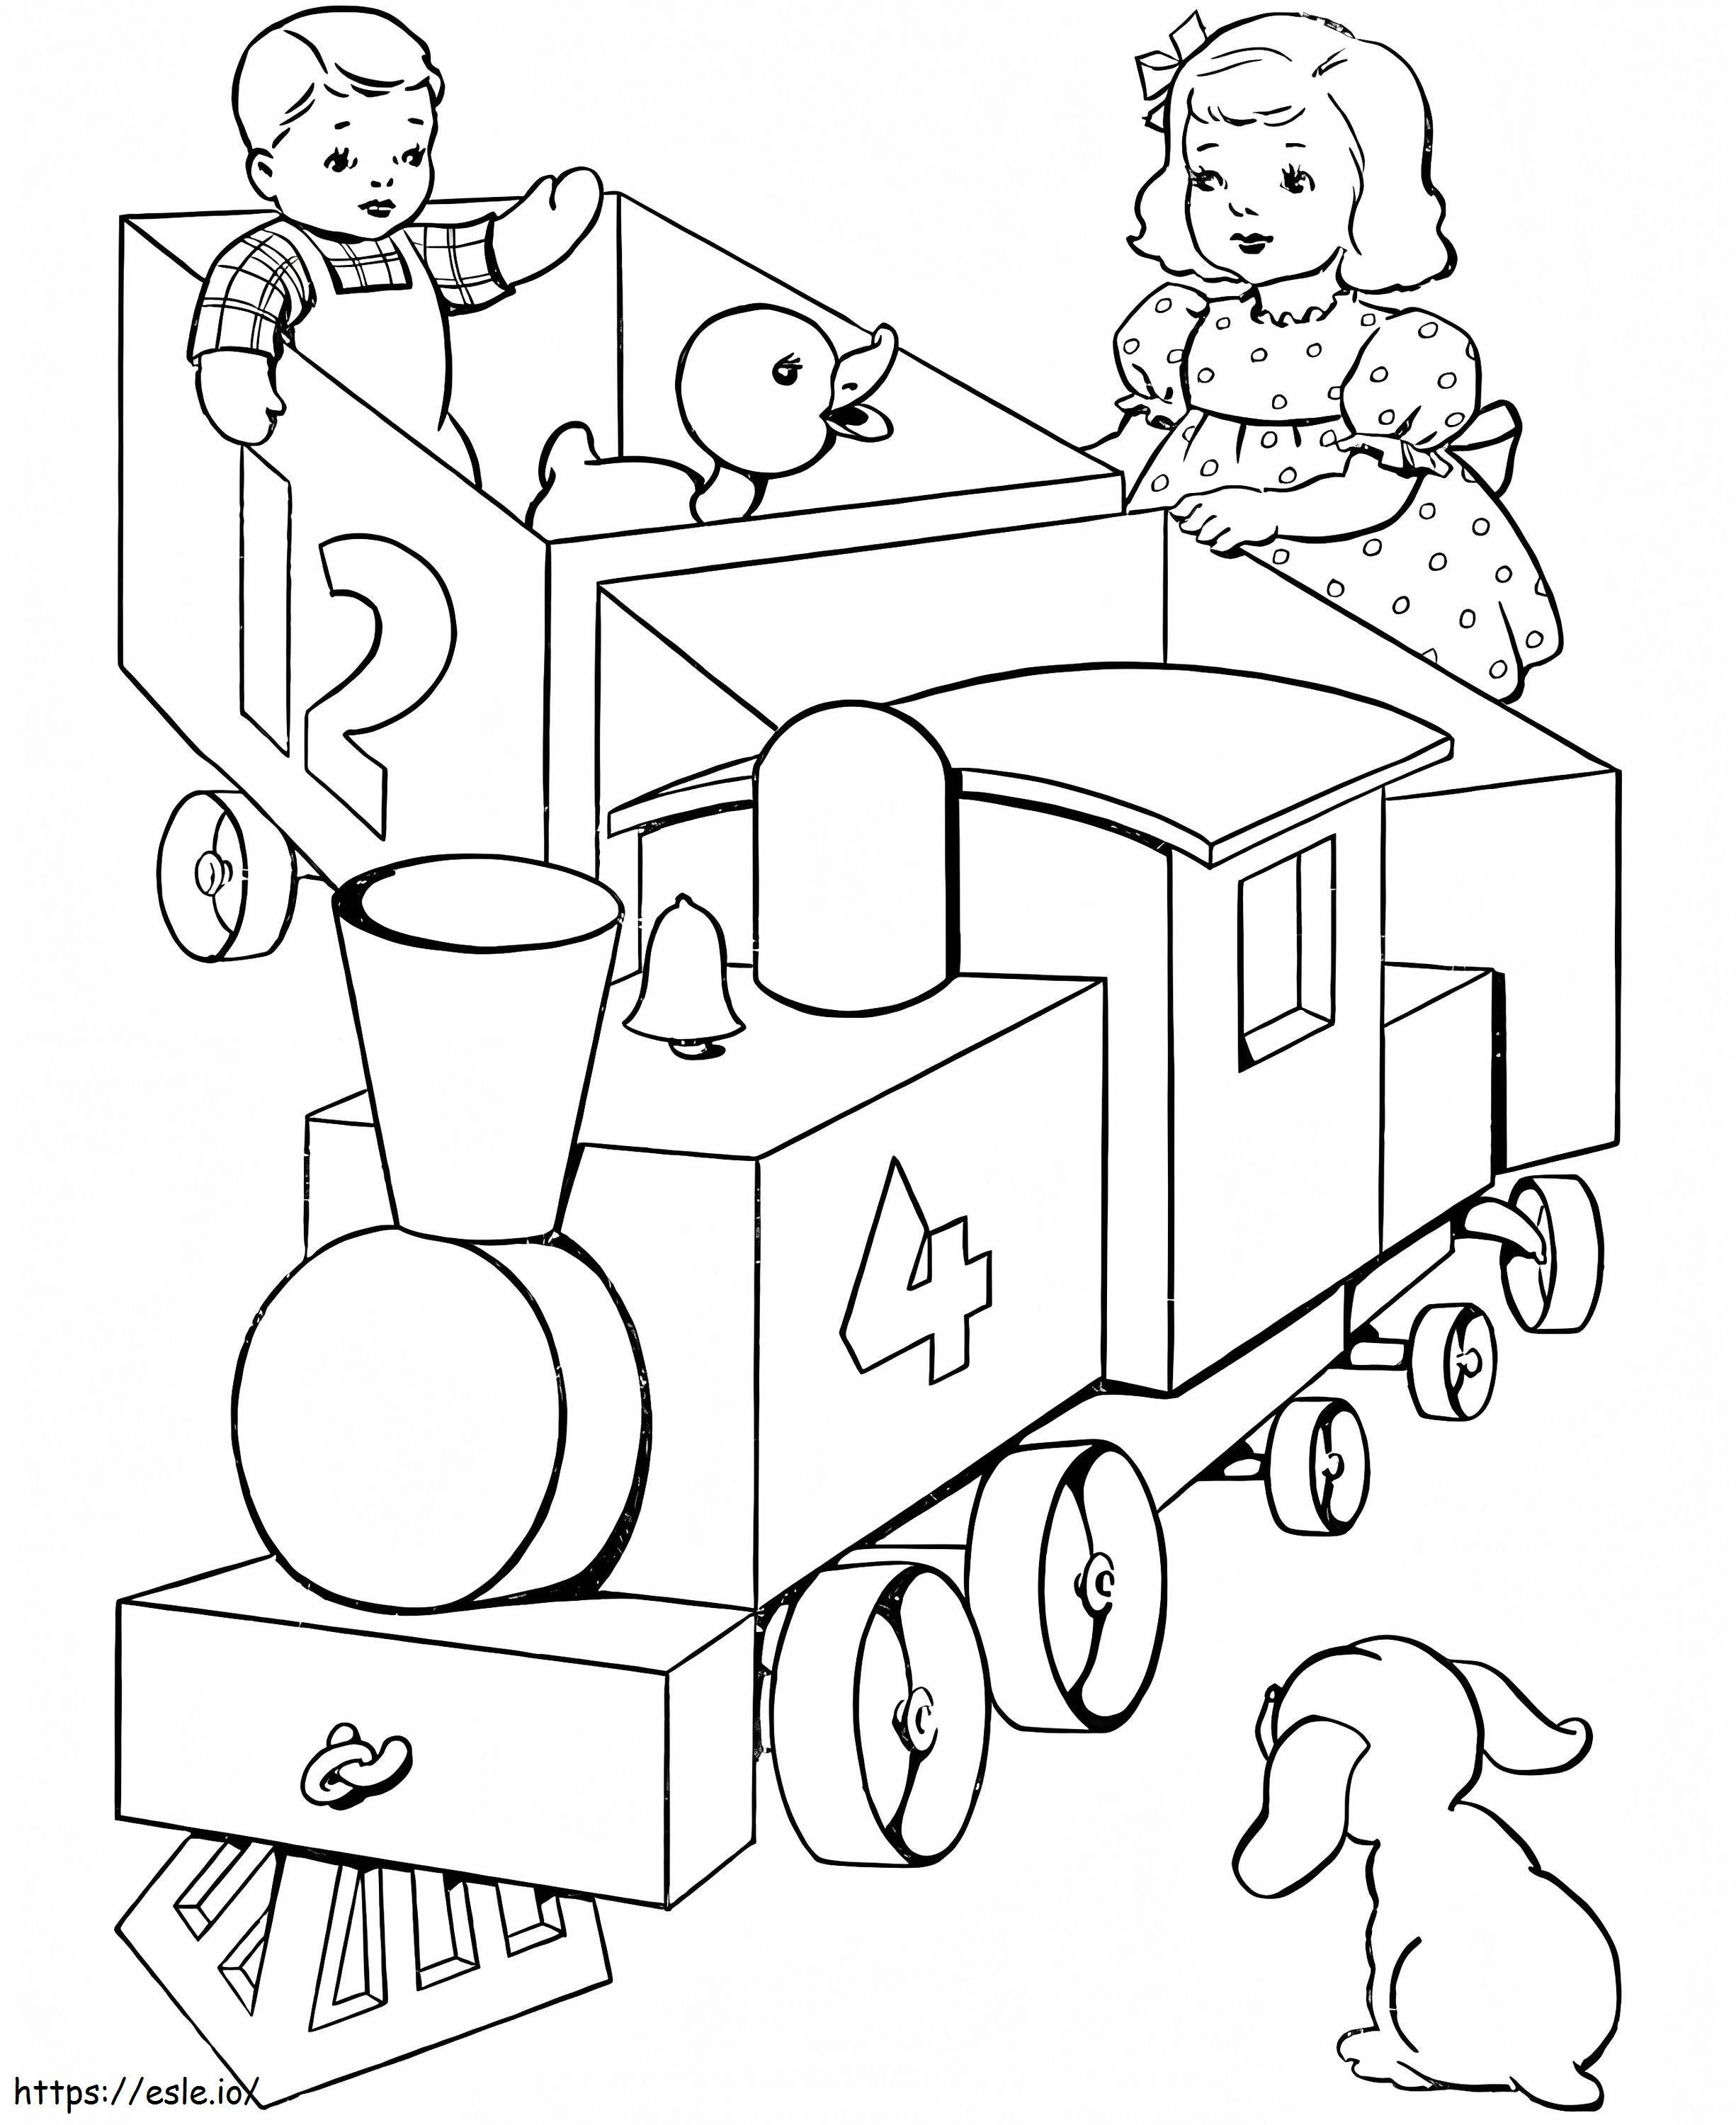 Toy Train For Kids coloring page